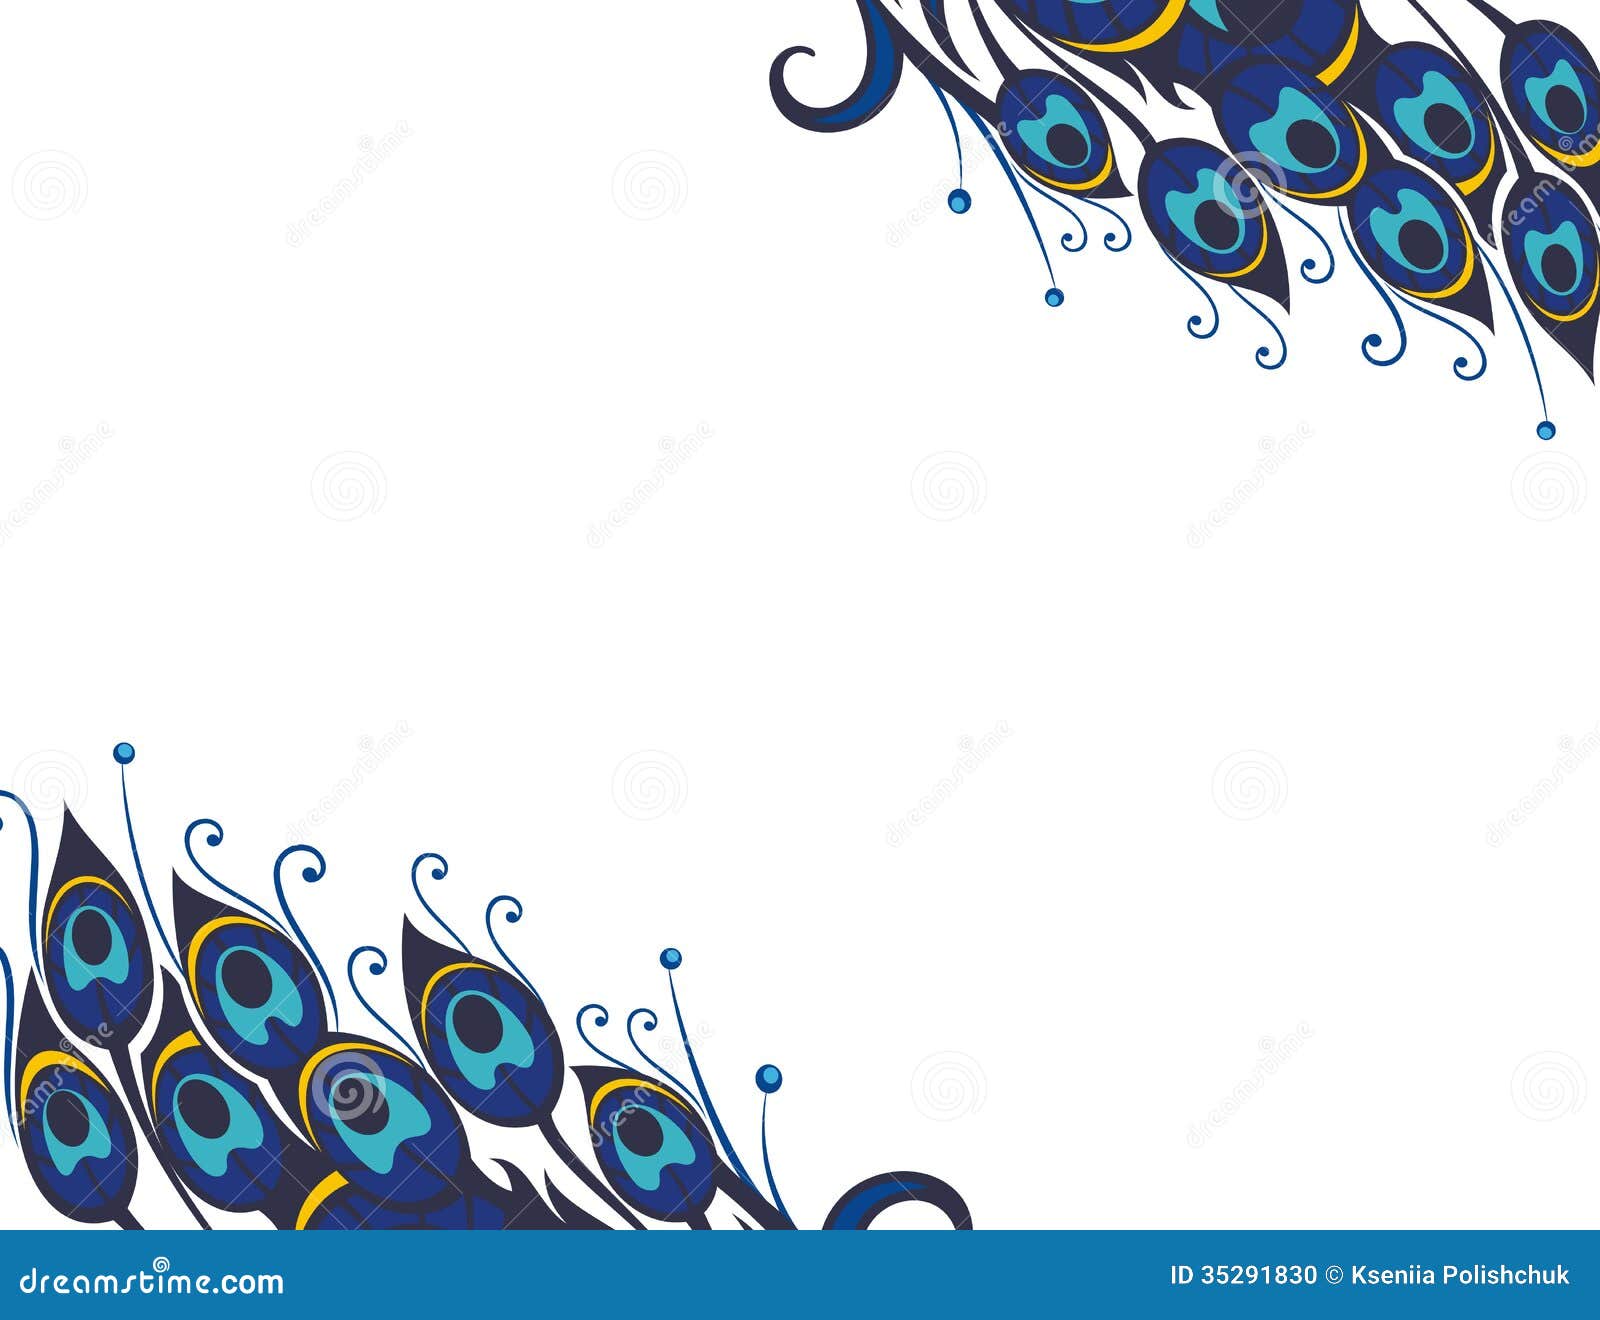 Beautiful Vector Peacock Feathers Background Stock Photo 